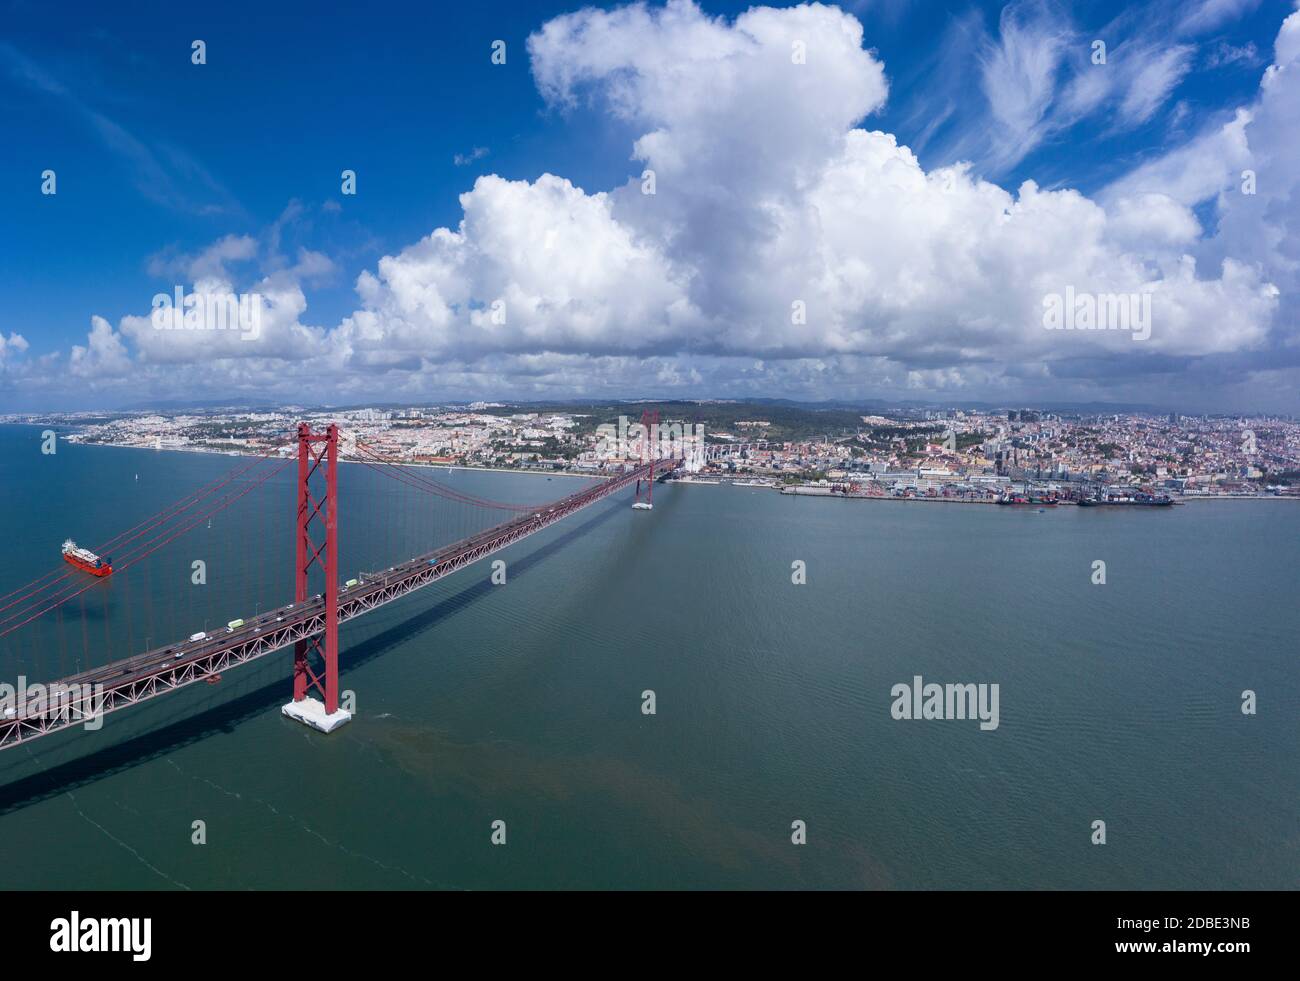 red bridge 25 april over river tagus sunny day cloud drone city landscape Stock Photo